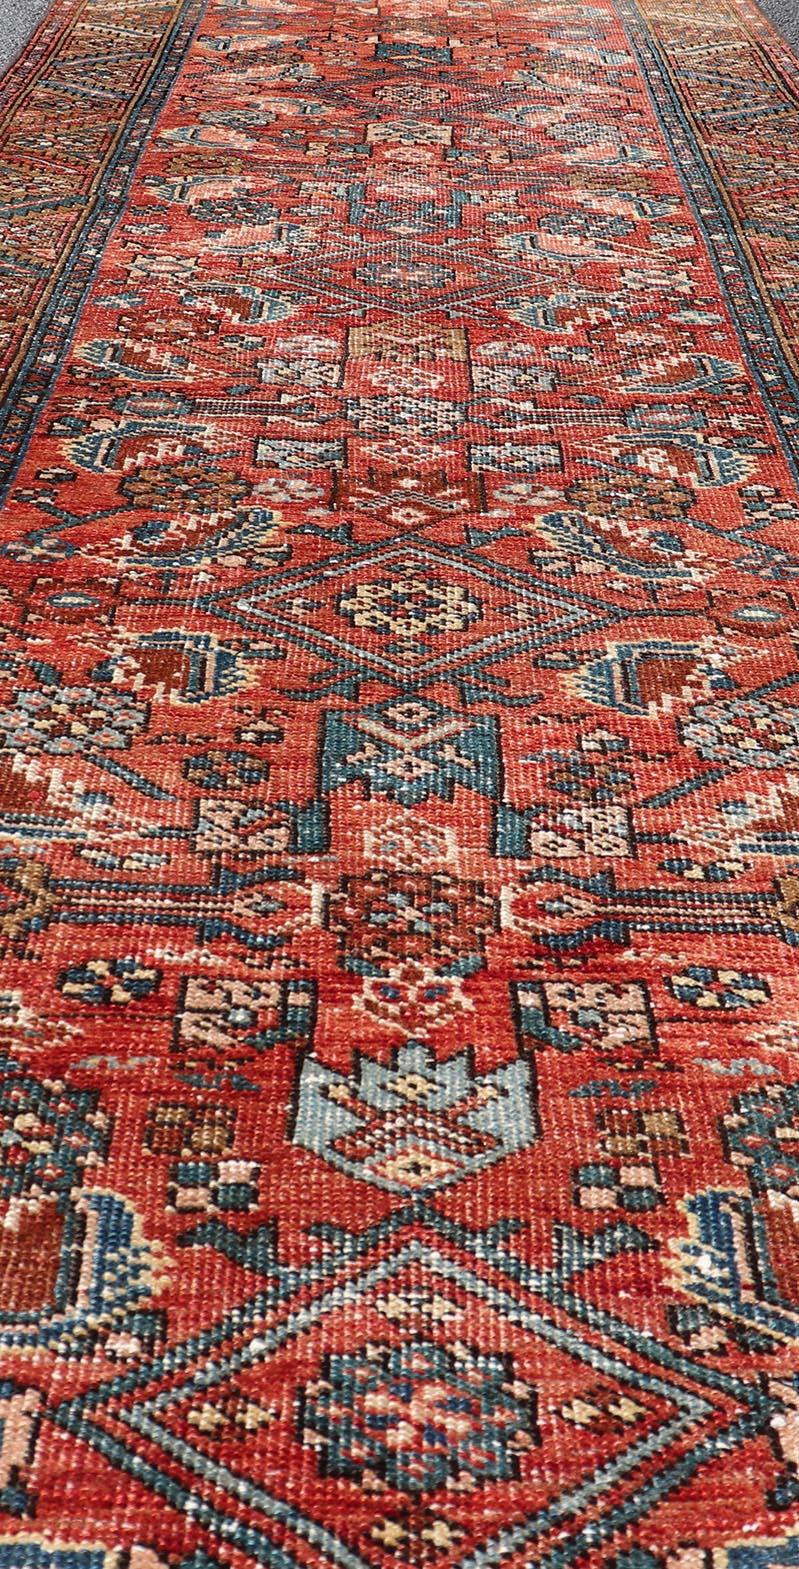 Antique Persian Heriz Runner with Colorful All-Over Stylized Floral Design. Keivan Woven Arts /  rug EMB-22130-15019, origin/iran Early 20th Century Heriz Runner. 
Measures: 2'11 x 10'9 
This magnificent Heriz runner from the early 20th century